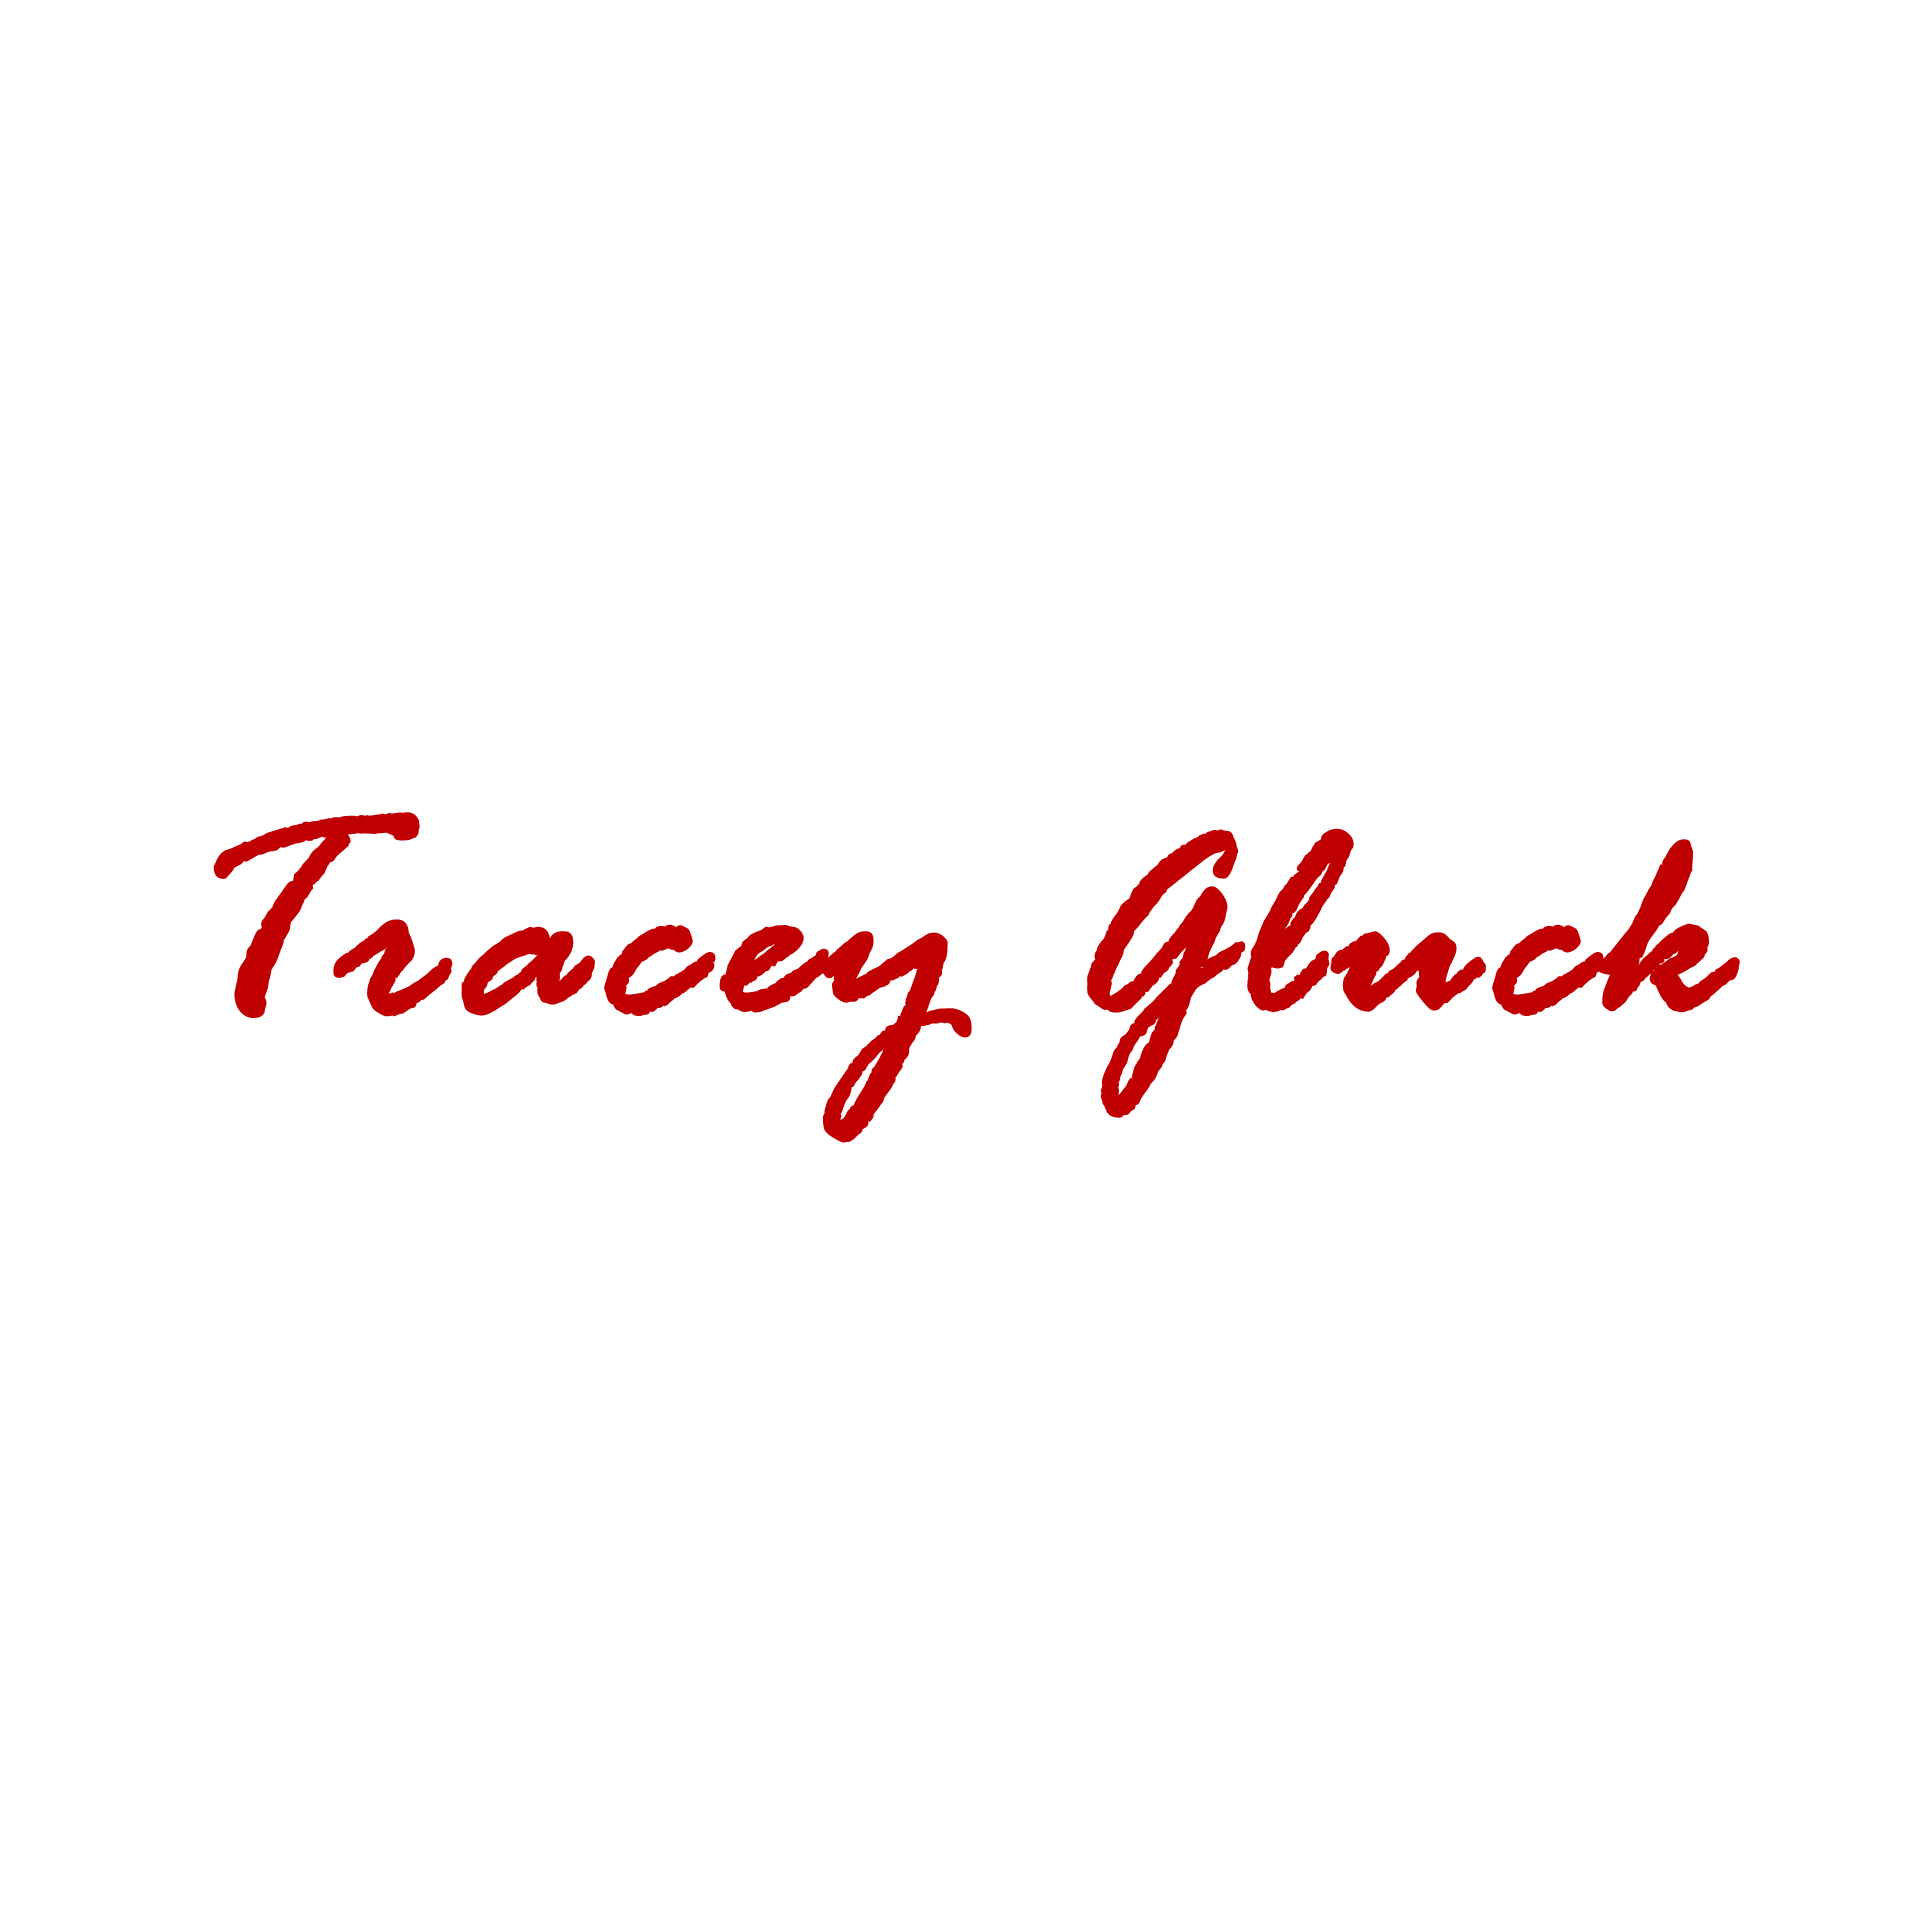 Tracey Gluck.png